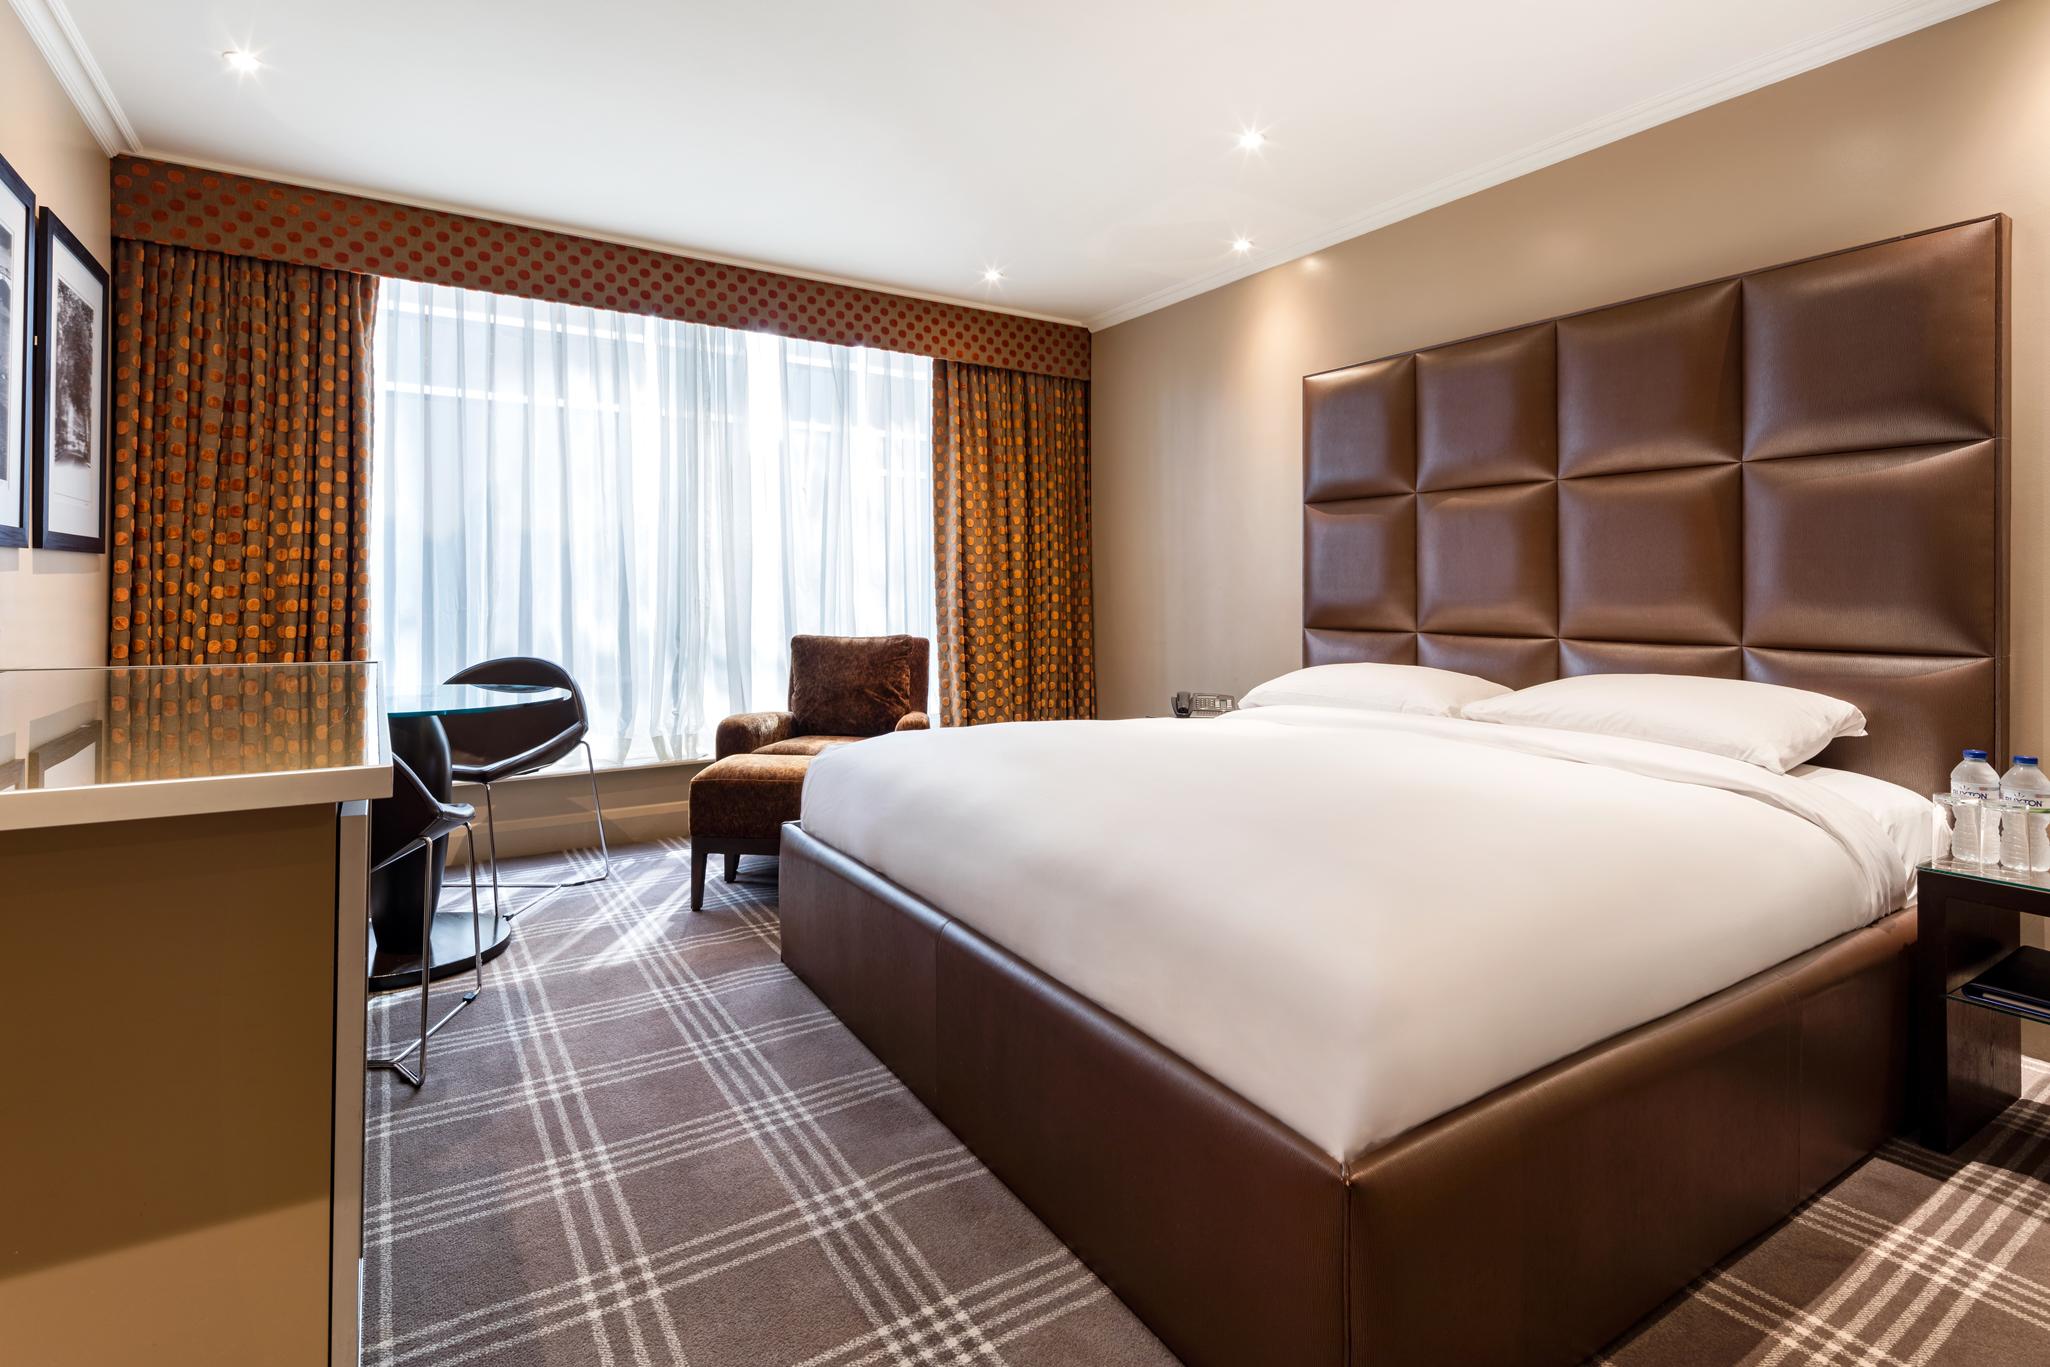 Superior Room - King Size Bed Radisson Blu Hotel & Conference Centre, London Heathrow Hayes 020 8759 6311